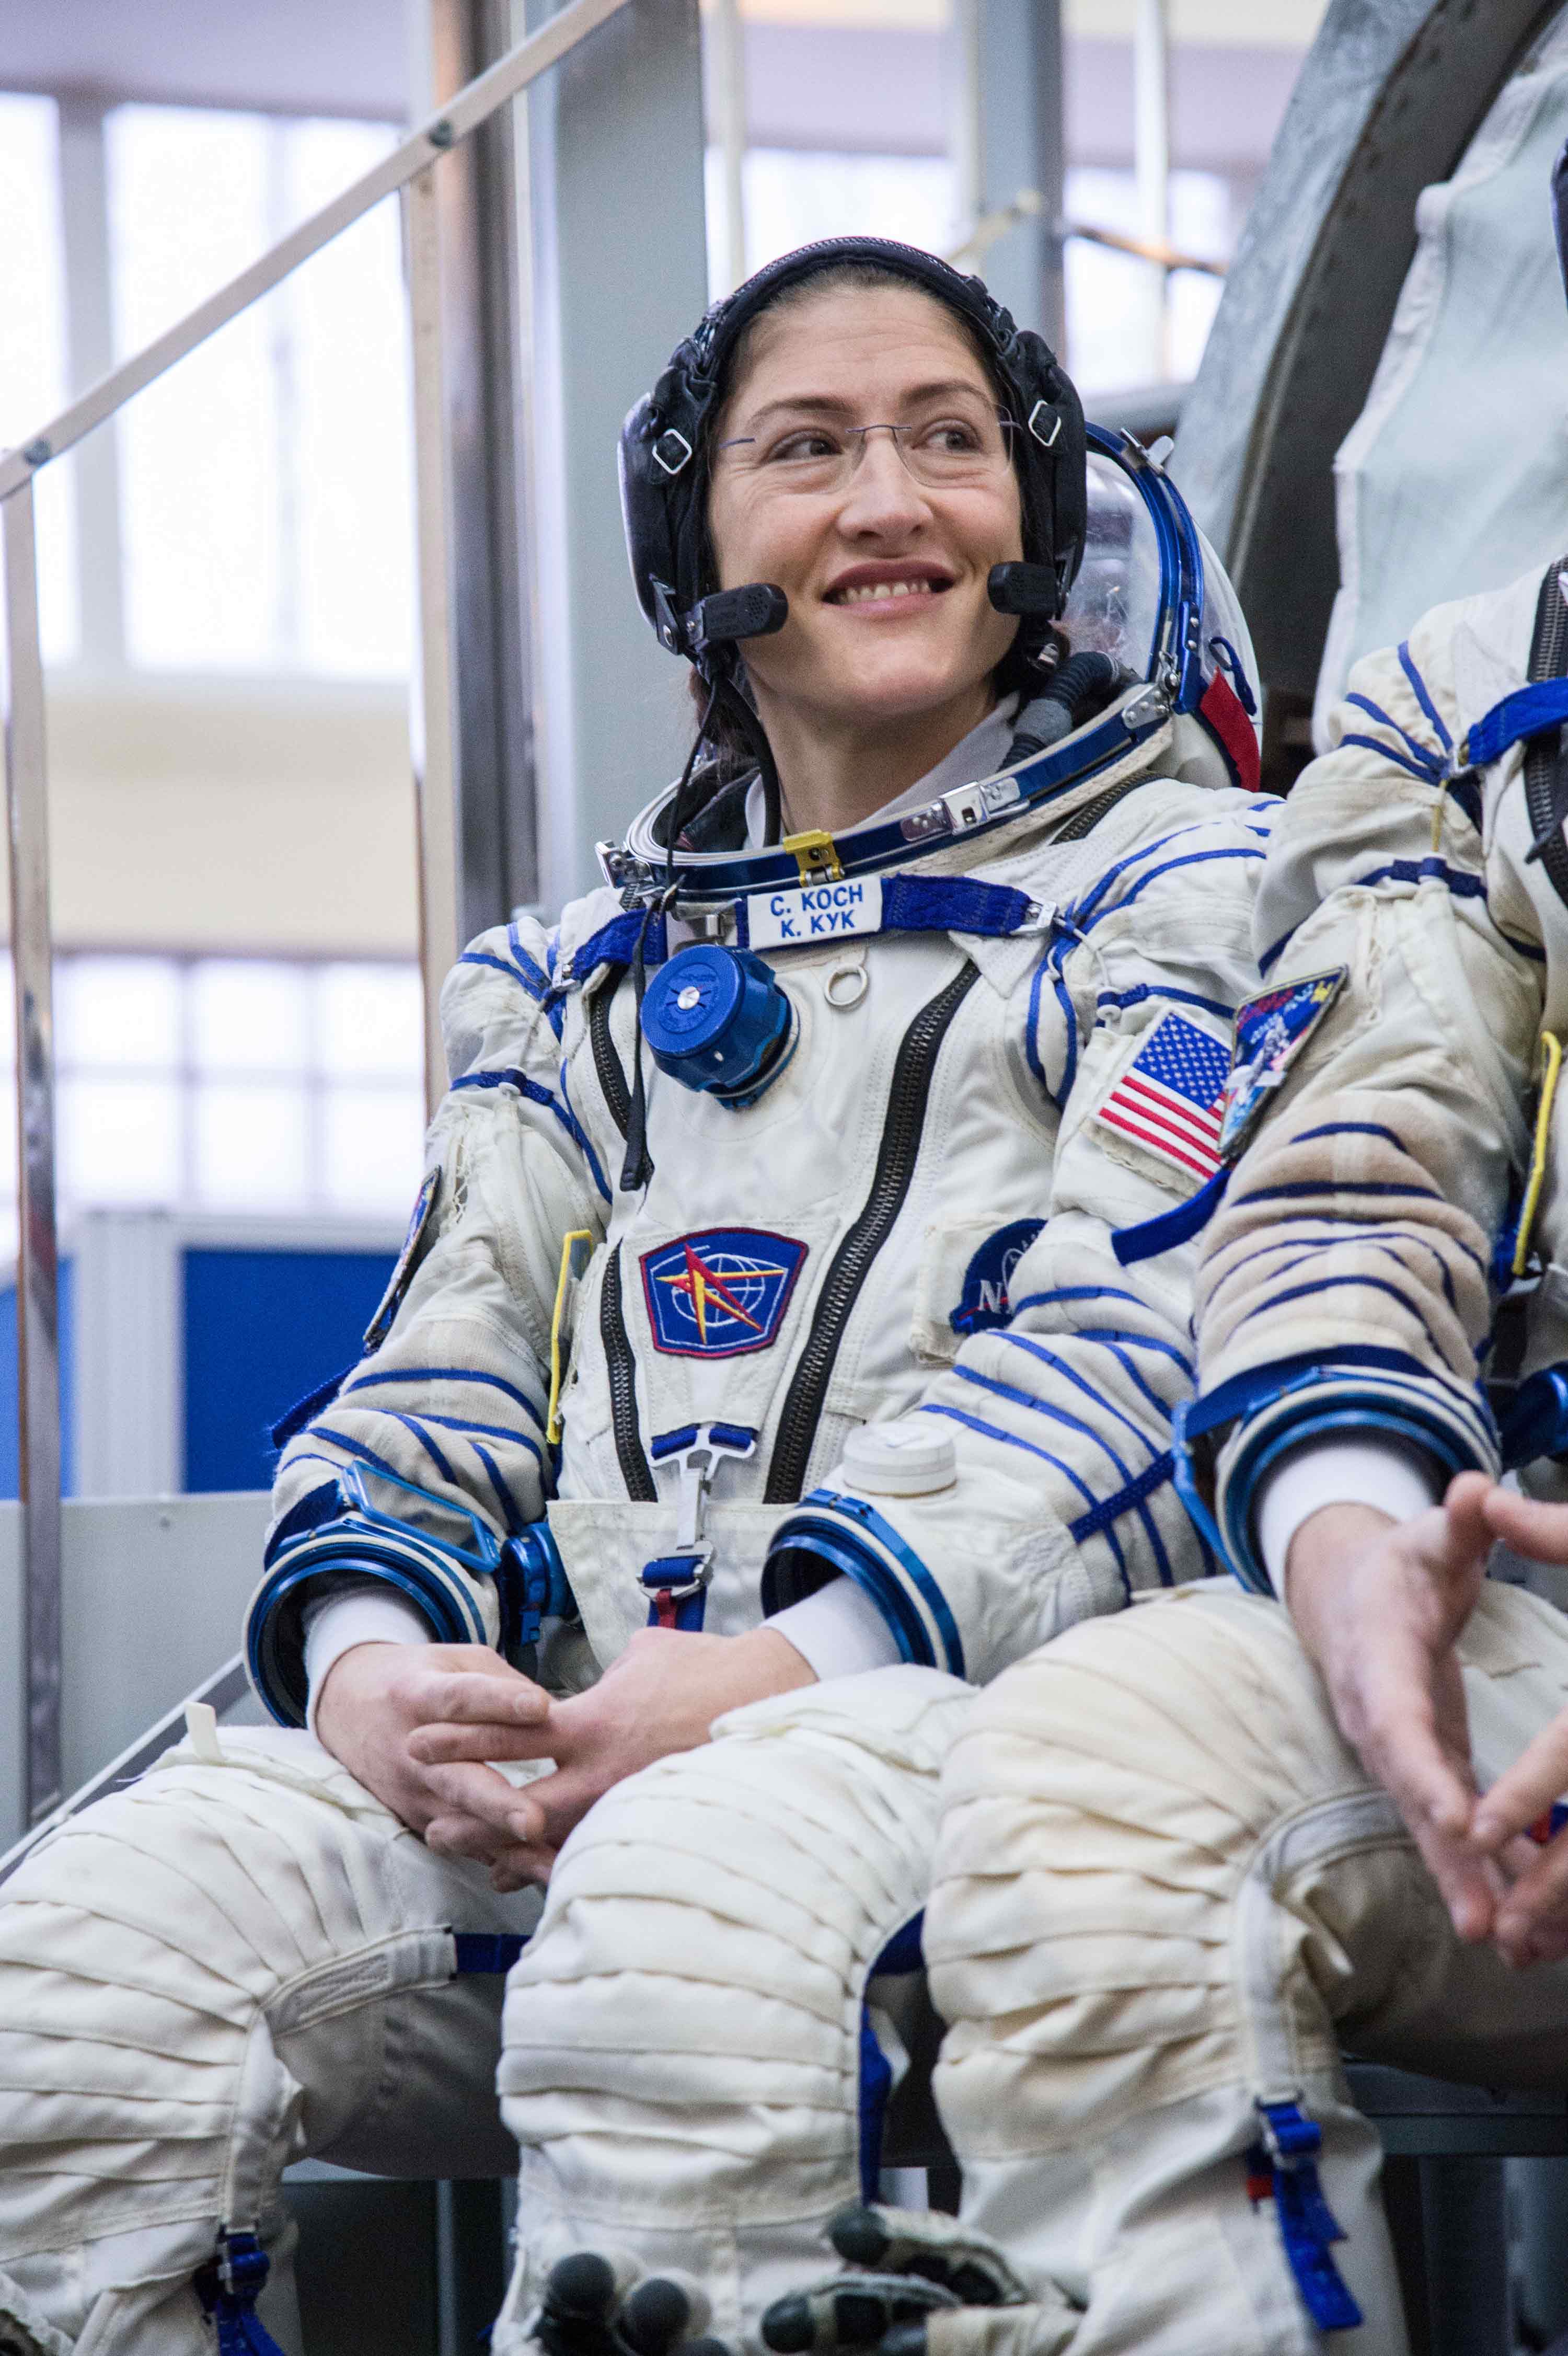 Astronaut Christina Koch is one of two women to make a space walk on the first all-female team.